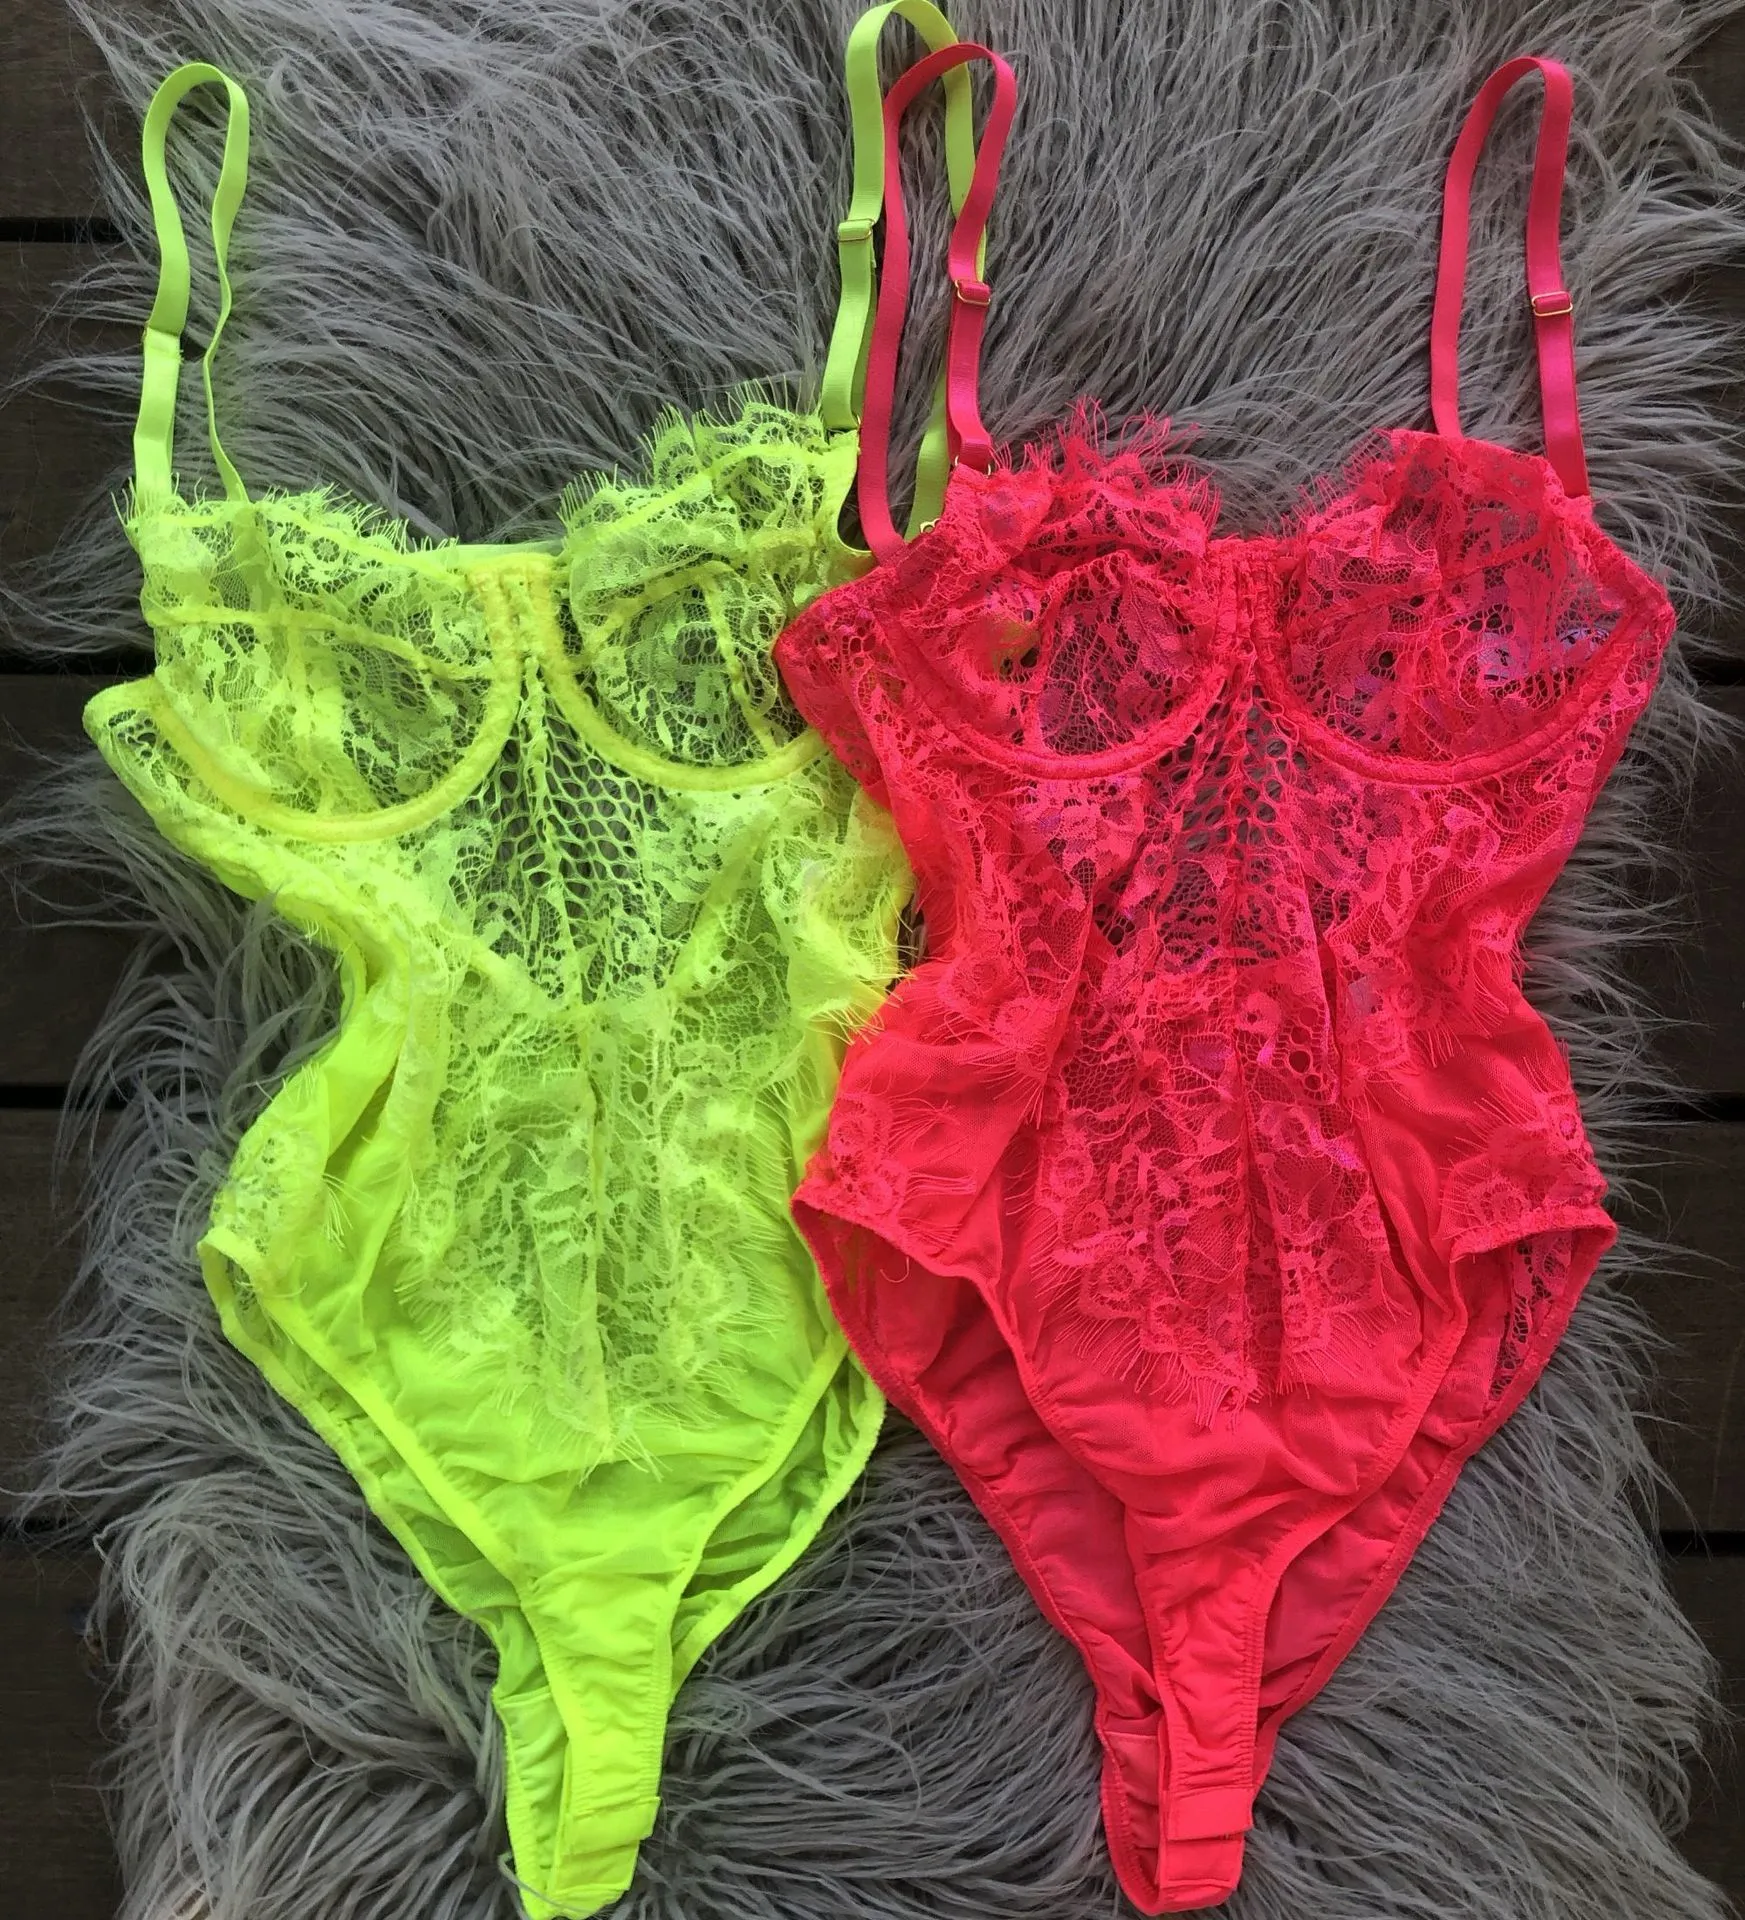 OMSJ Neon Lace Lace Cami Bodysuit With Eyelashes And Sheer Bodycon Slim  Fit, Backless, And Sexy Summer Top From Lu04, $13.68